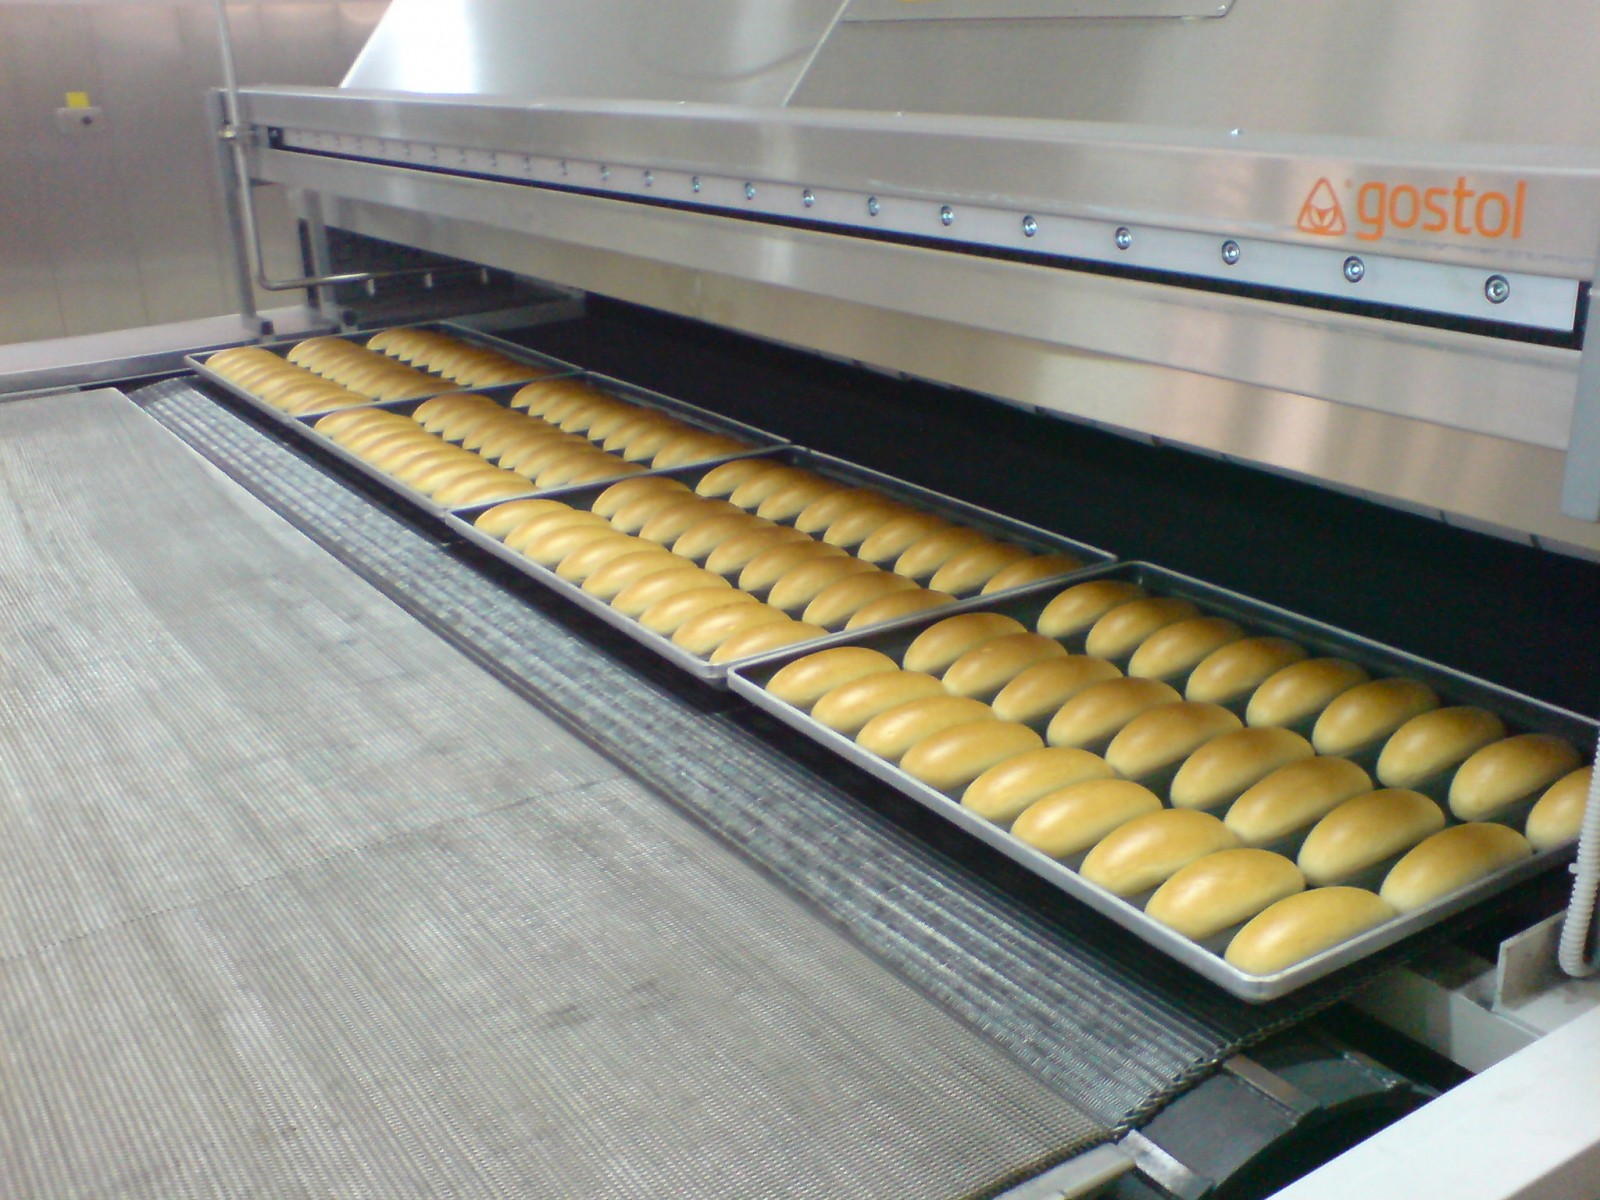 Lines for other types of bread